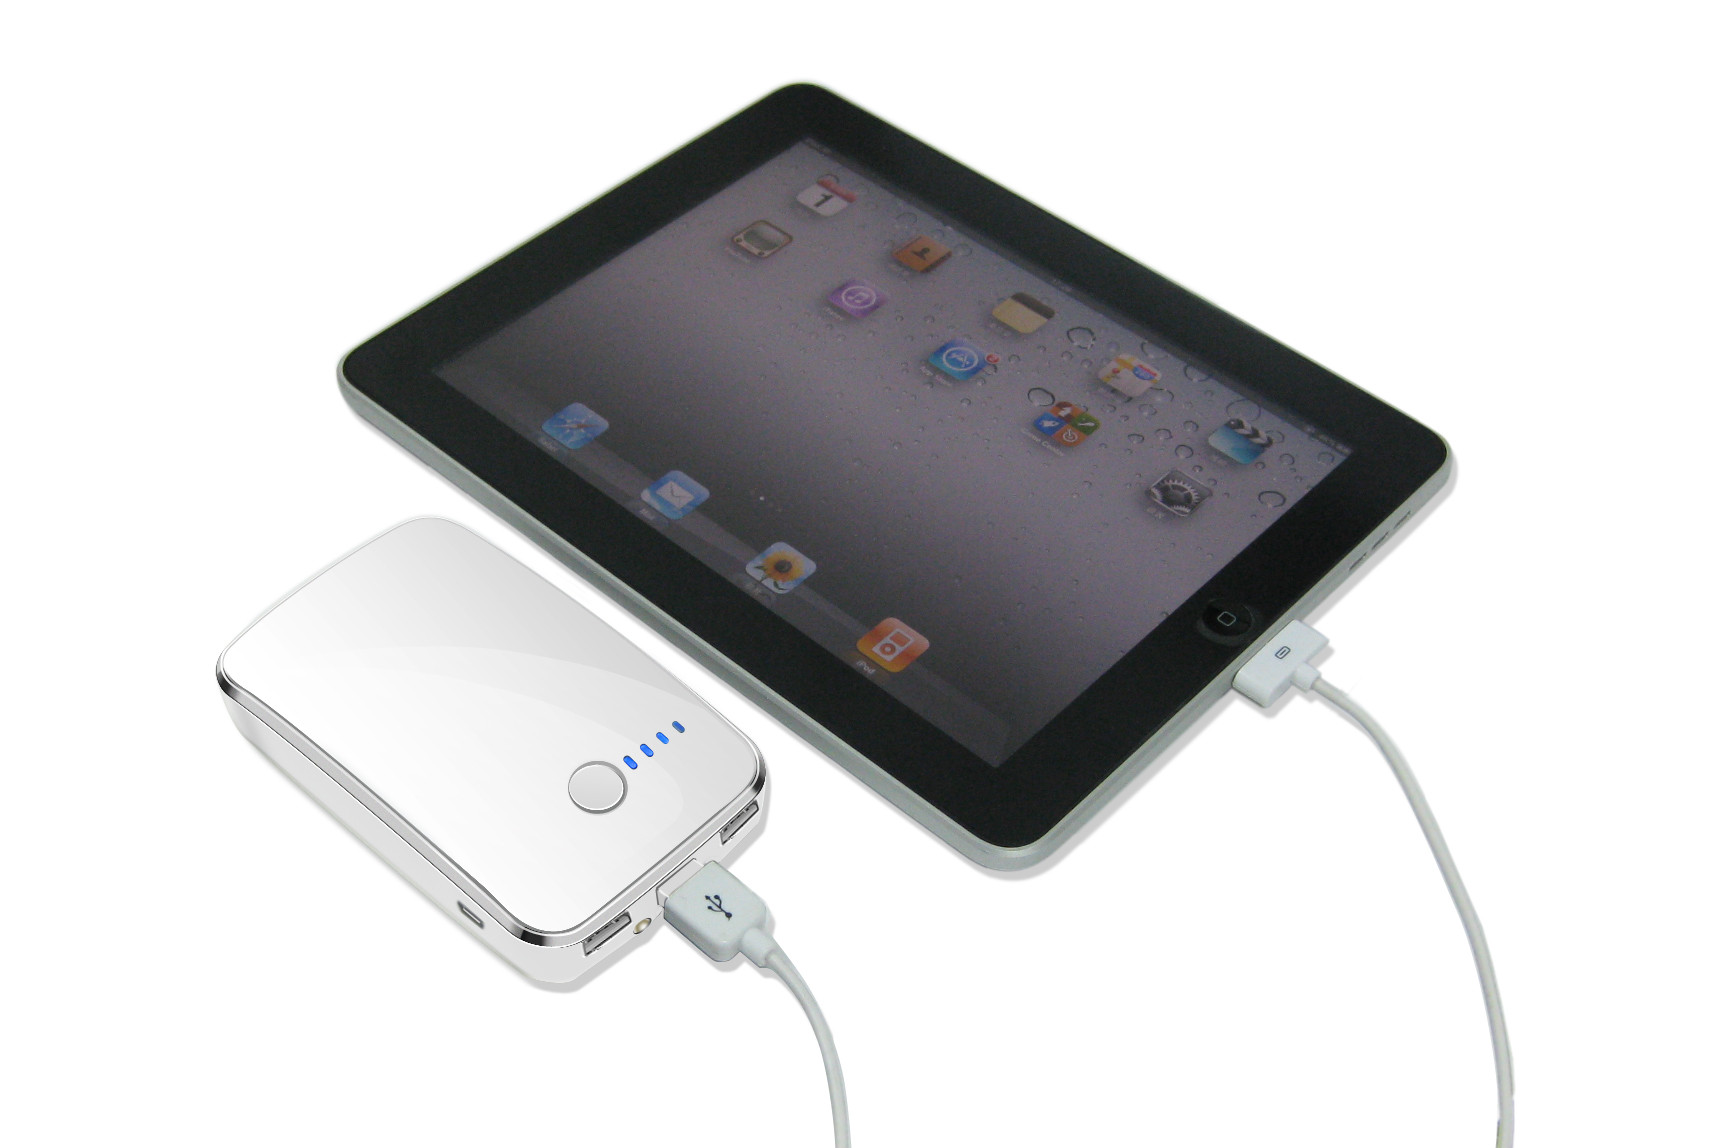 White Portable Battery Power Packs with USB connectors for Ipod, Ipad , mobile phone